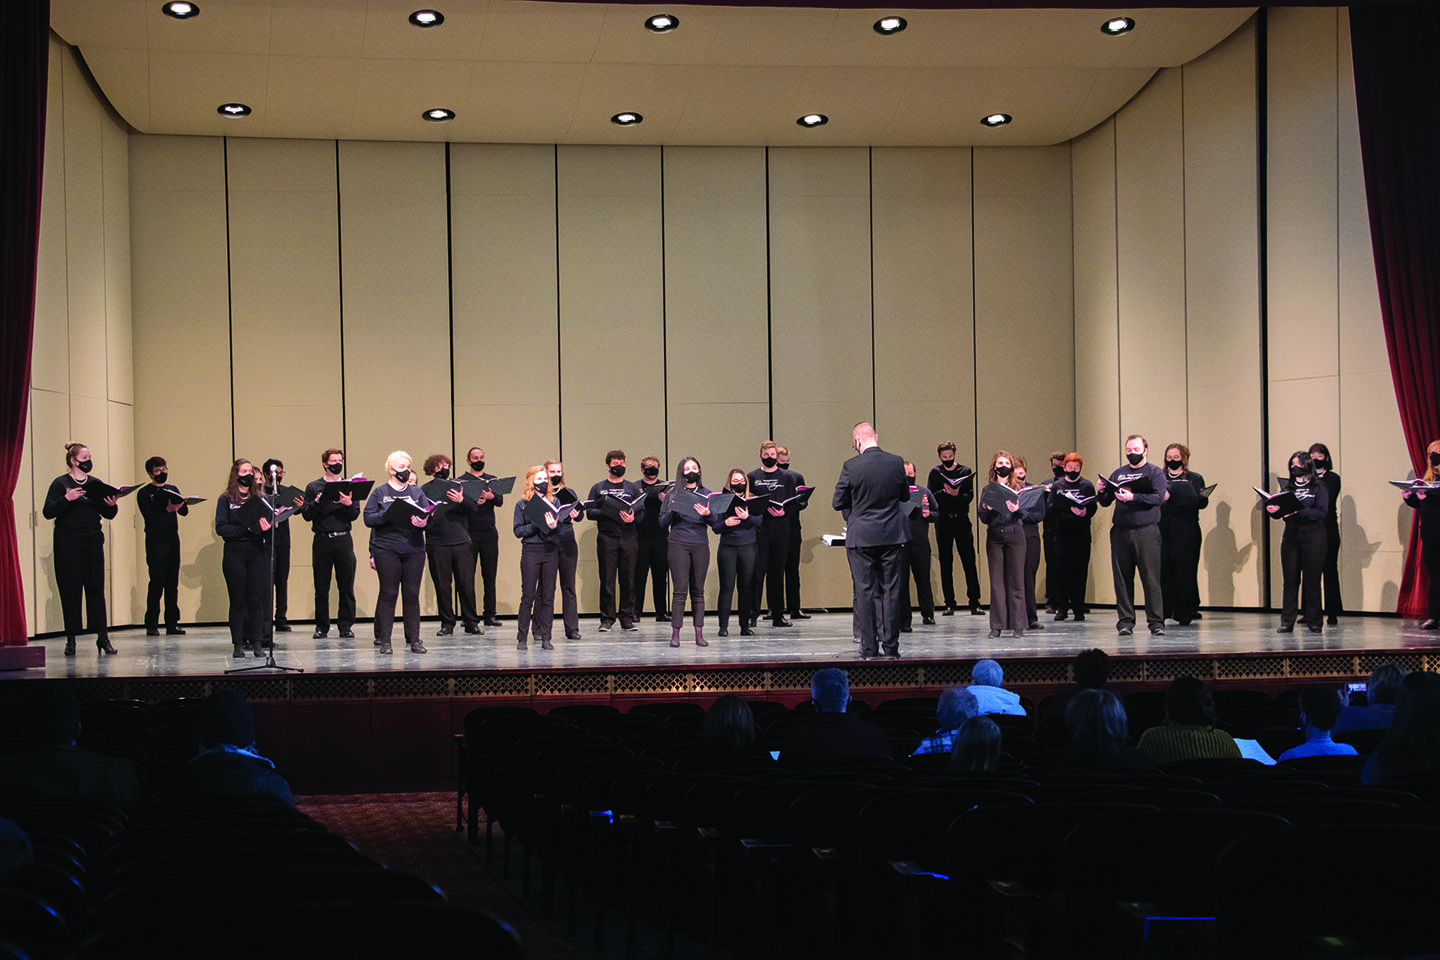 USD Chamber Singers perform at Spring Choral Showcase